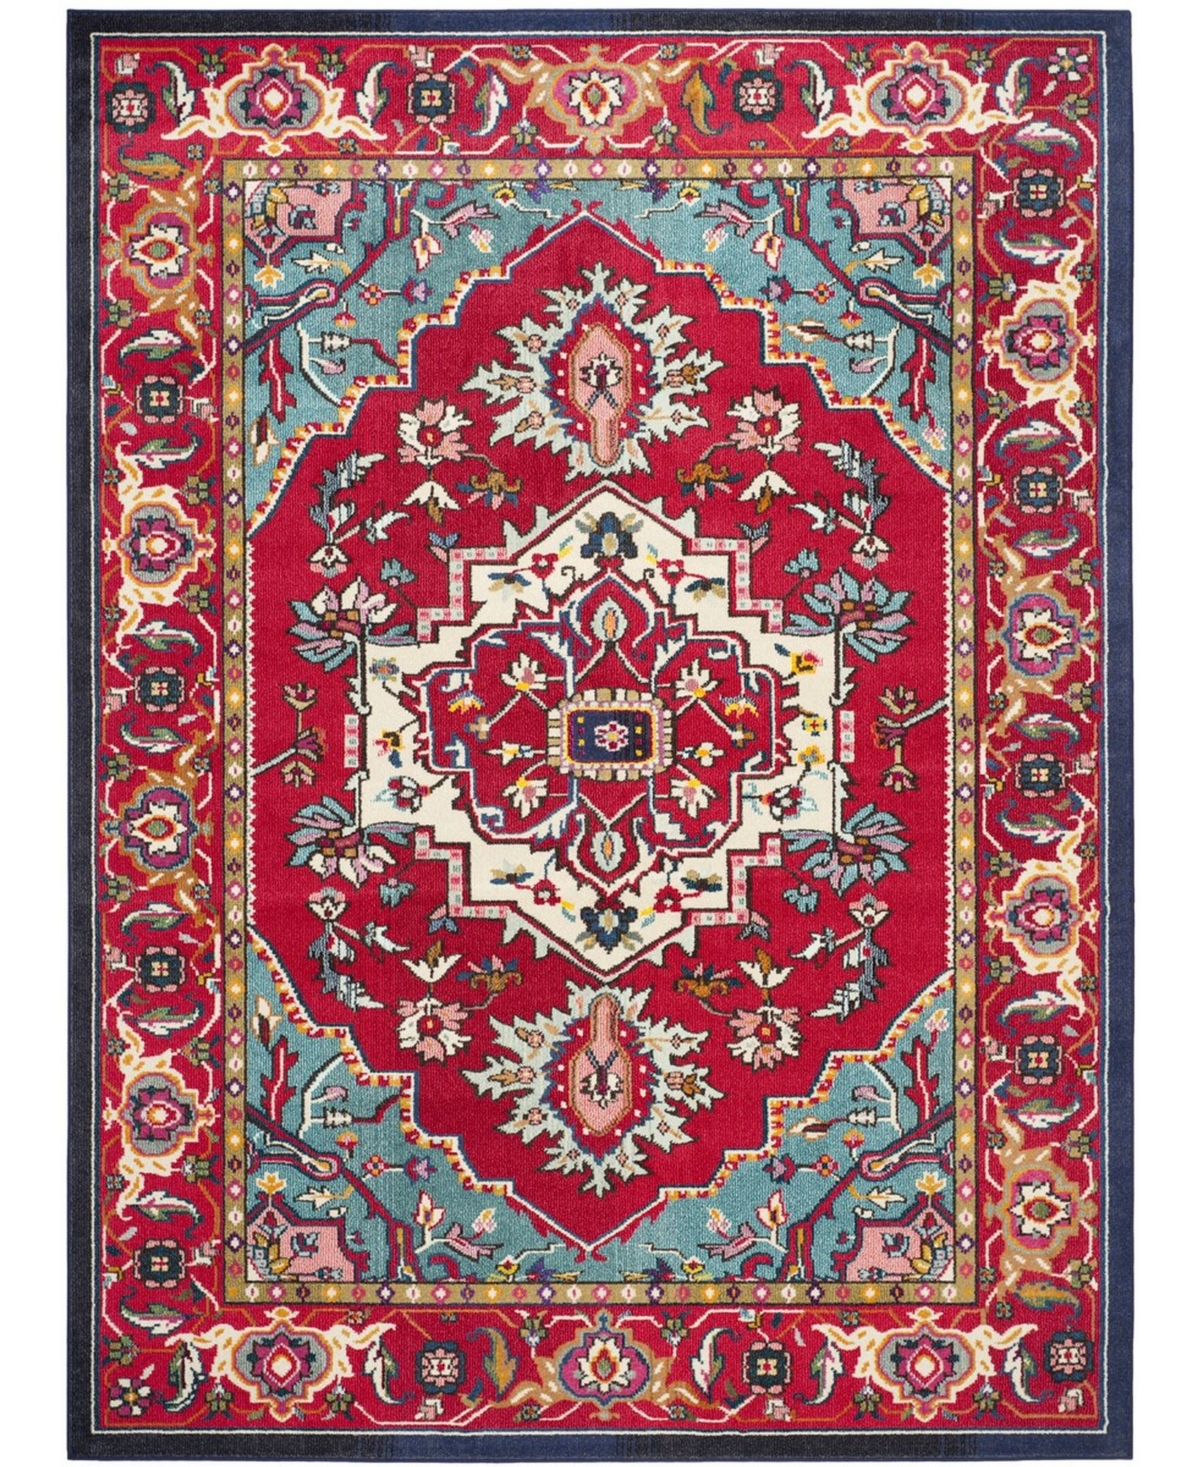 Safavieh Monaco Red and Turquoise 11' x 15' Area Rug - Red